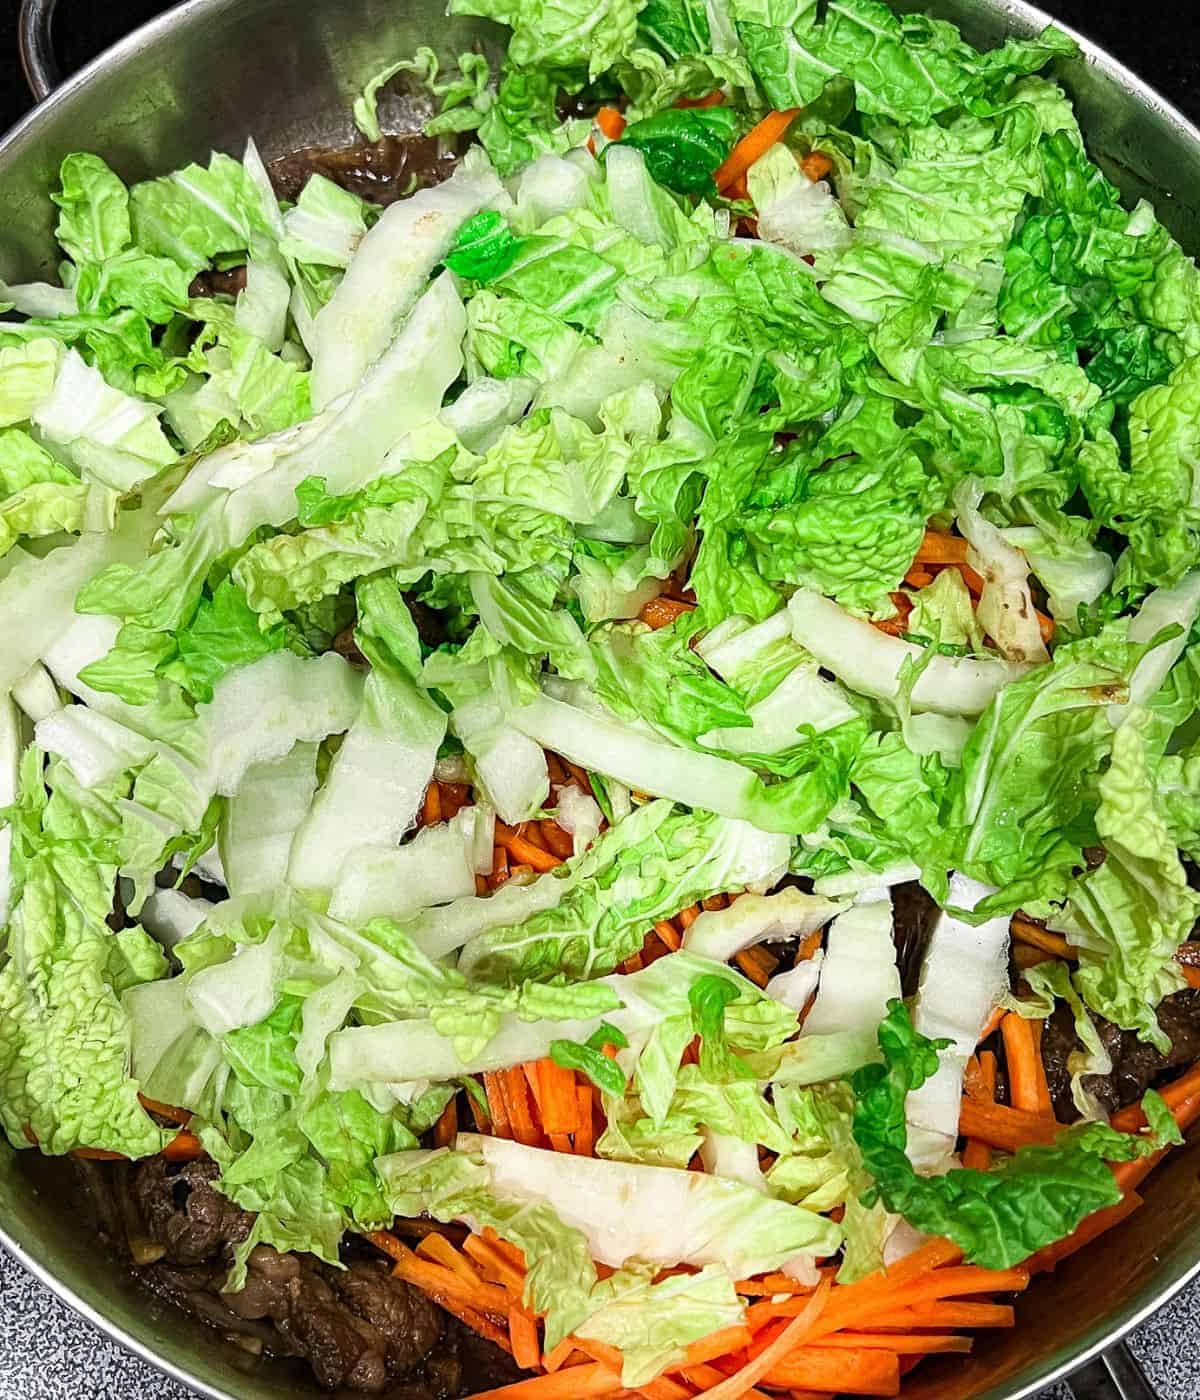 Adding carrots and napa cabbage to beef udon stir-fry.